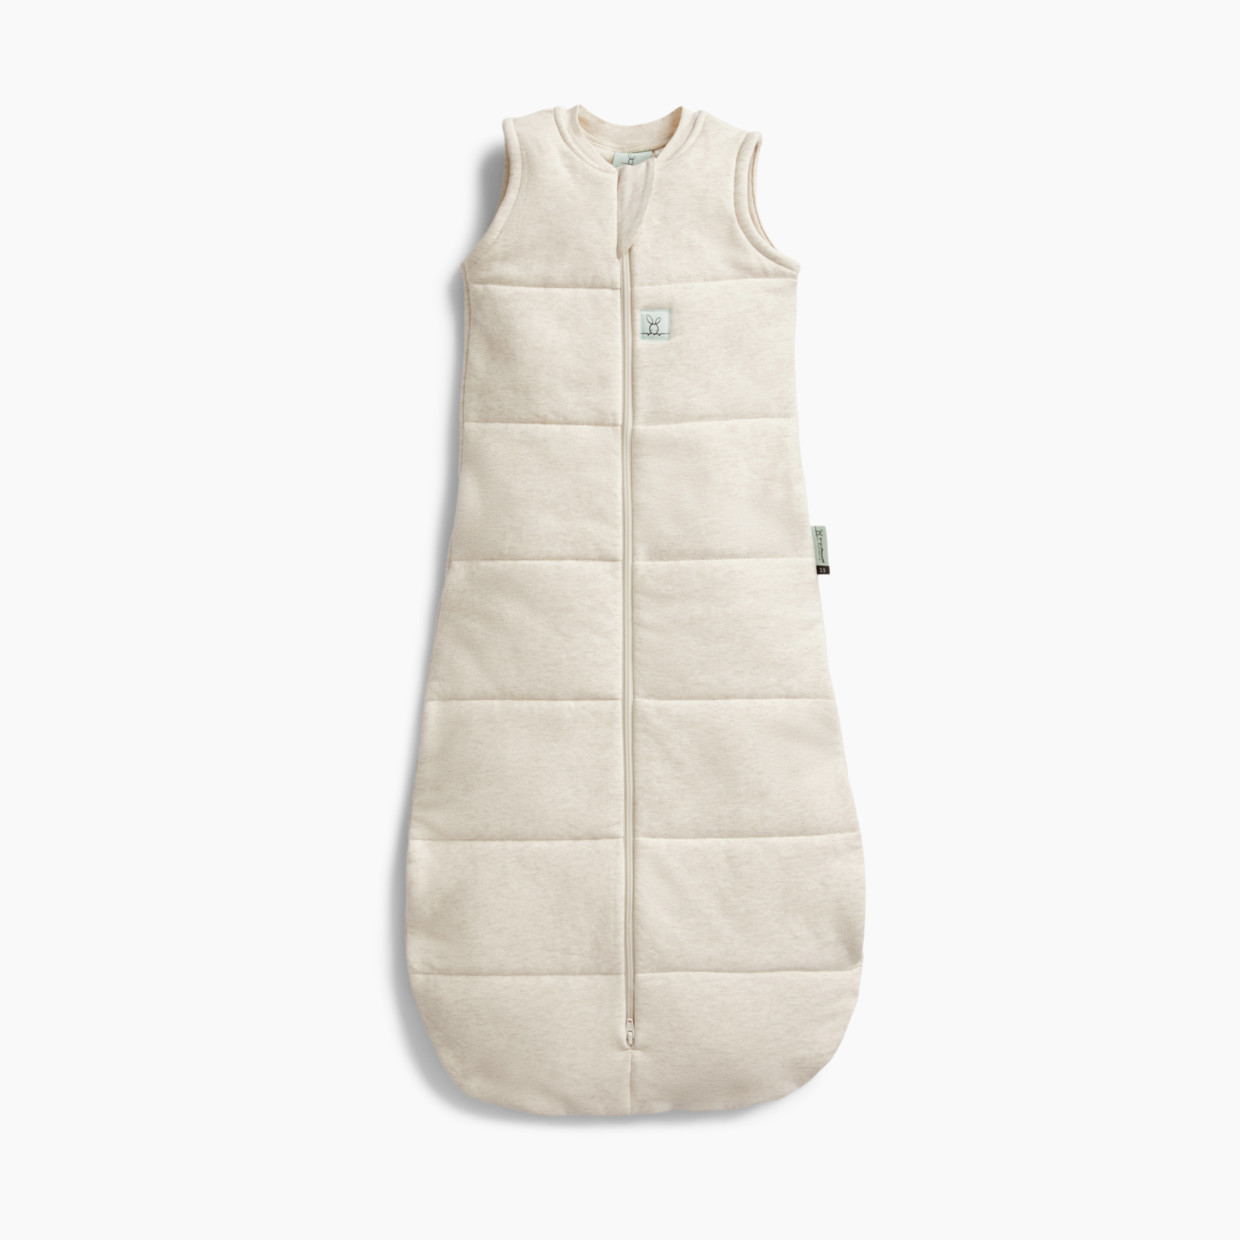 ergoPouch Jersey Sleep Sack 2.5 Tog - Oatmeal Marle, 8-24 Months.